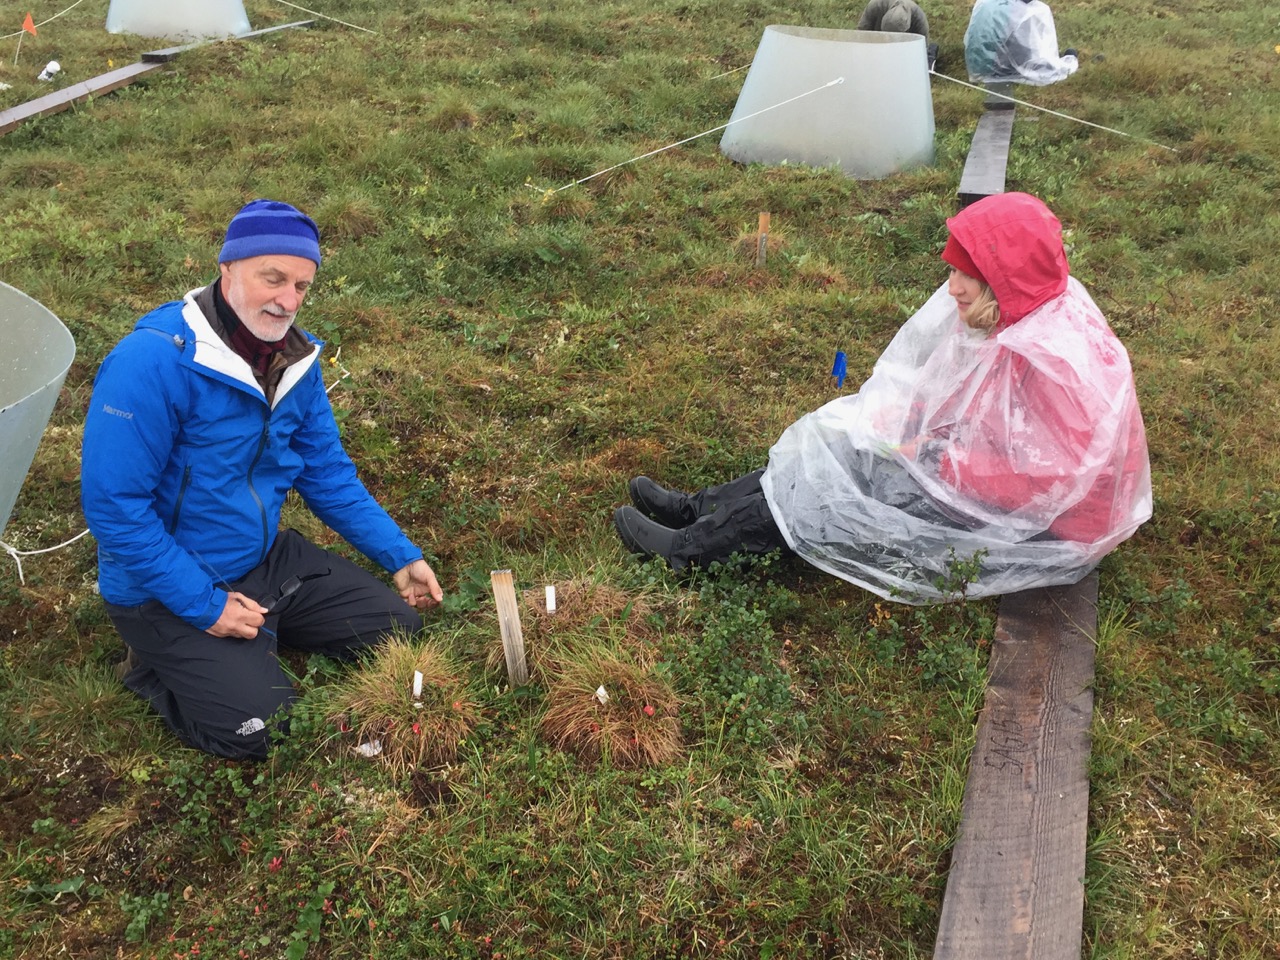 Two researchers return to tussock transplant experiment